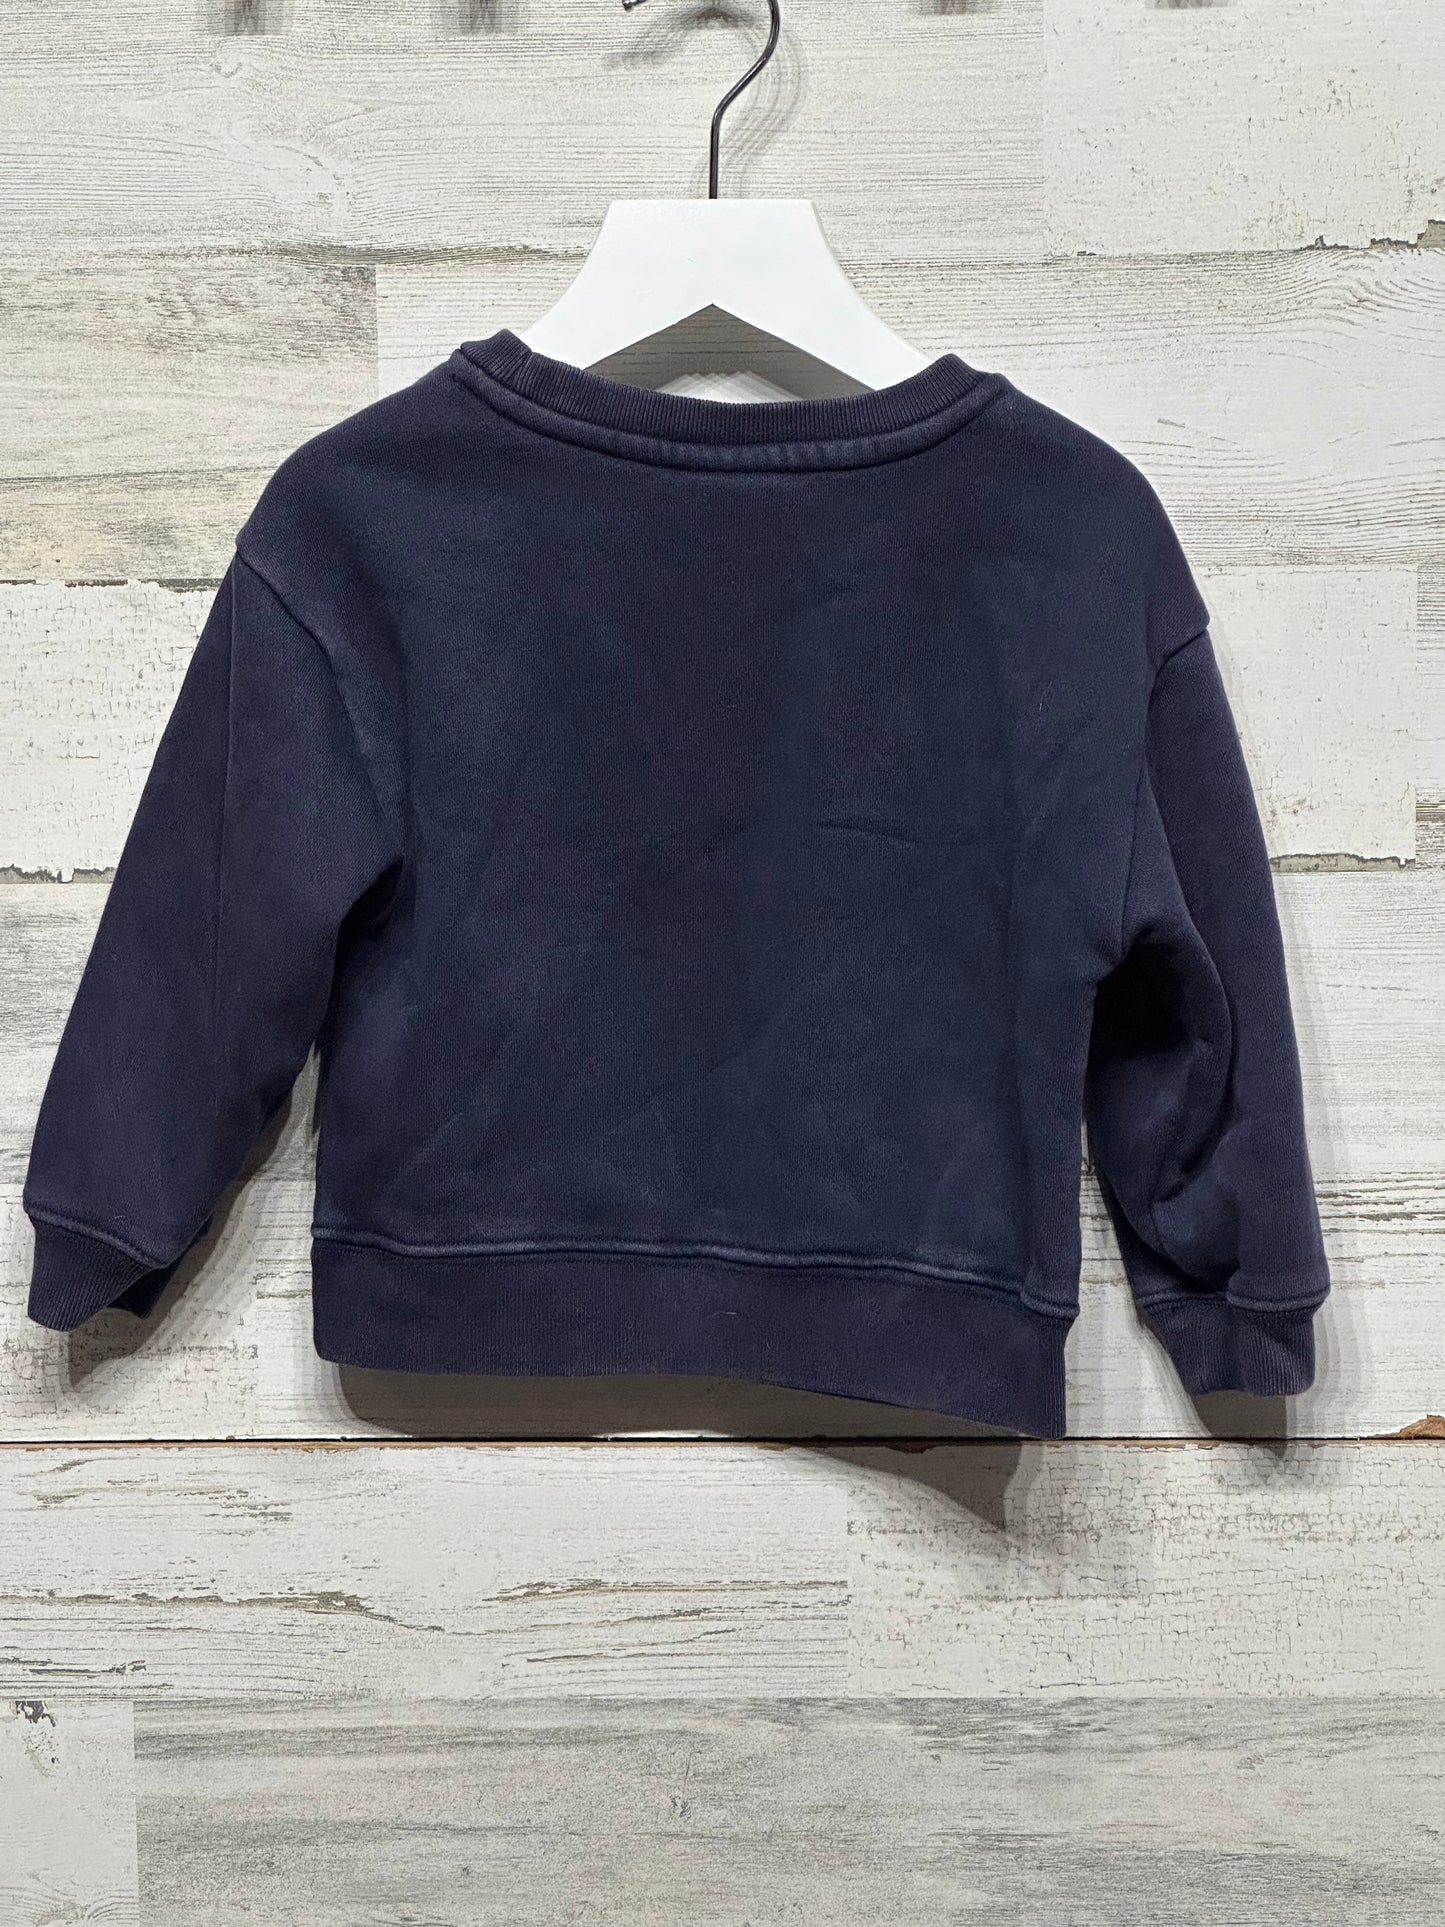 Girls Size 2 Years Gap Home's Cool Sweatshirt - Good Used Condition